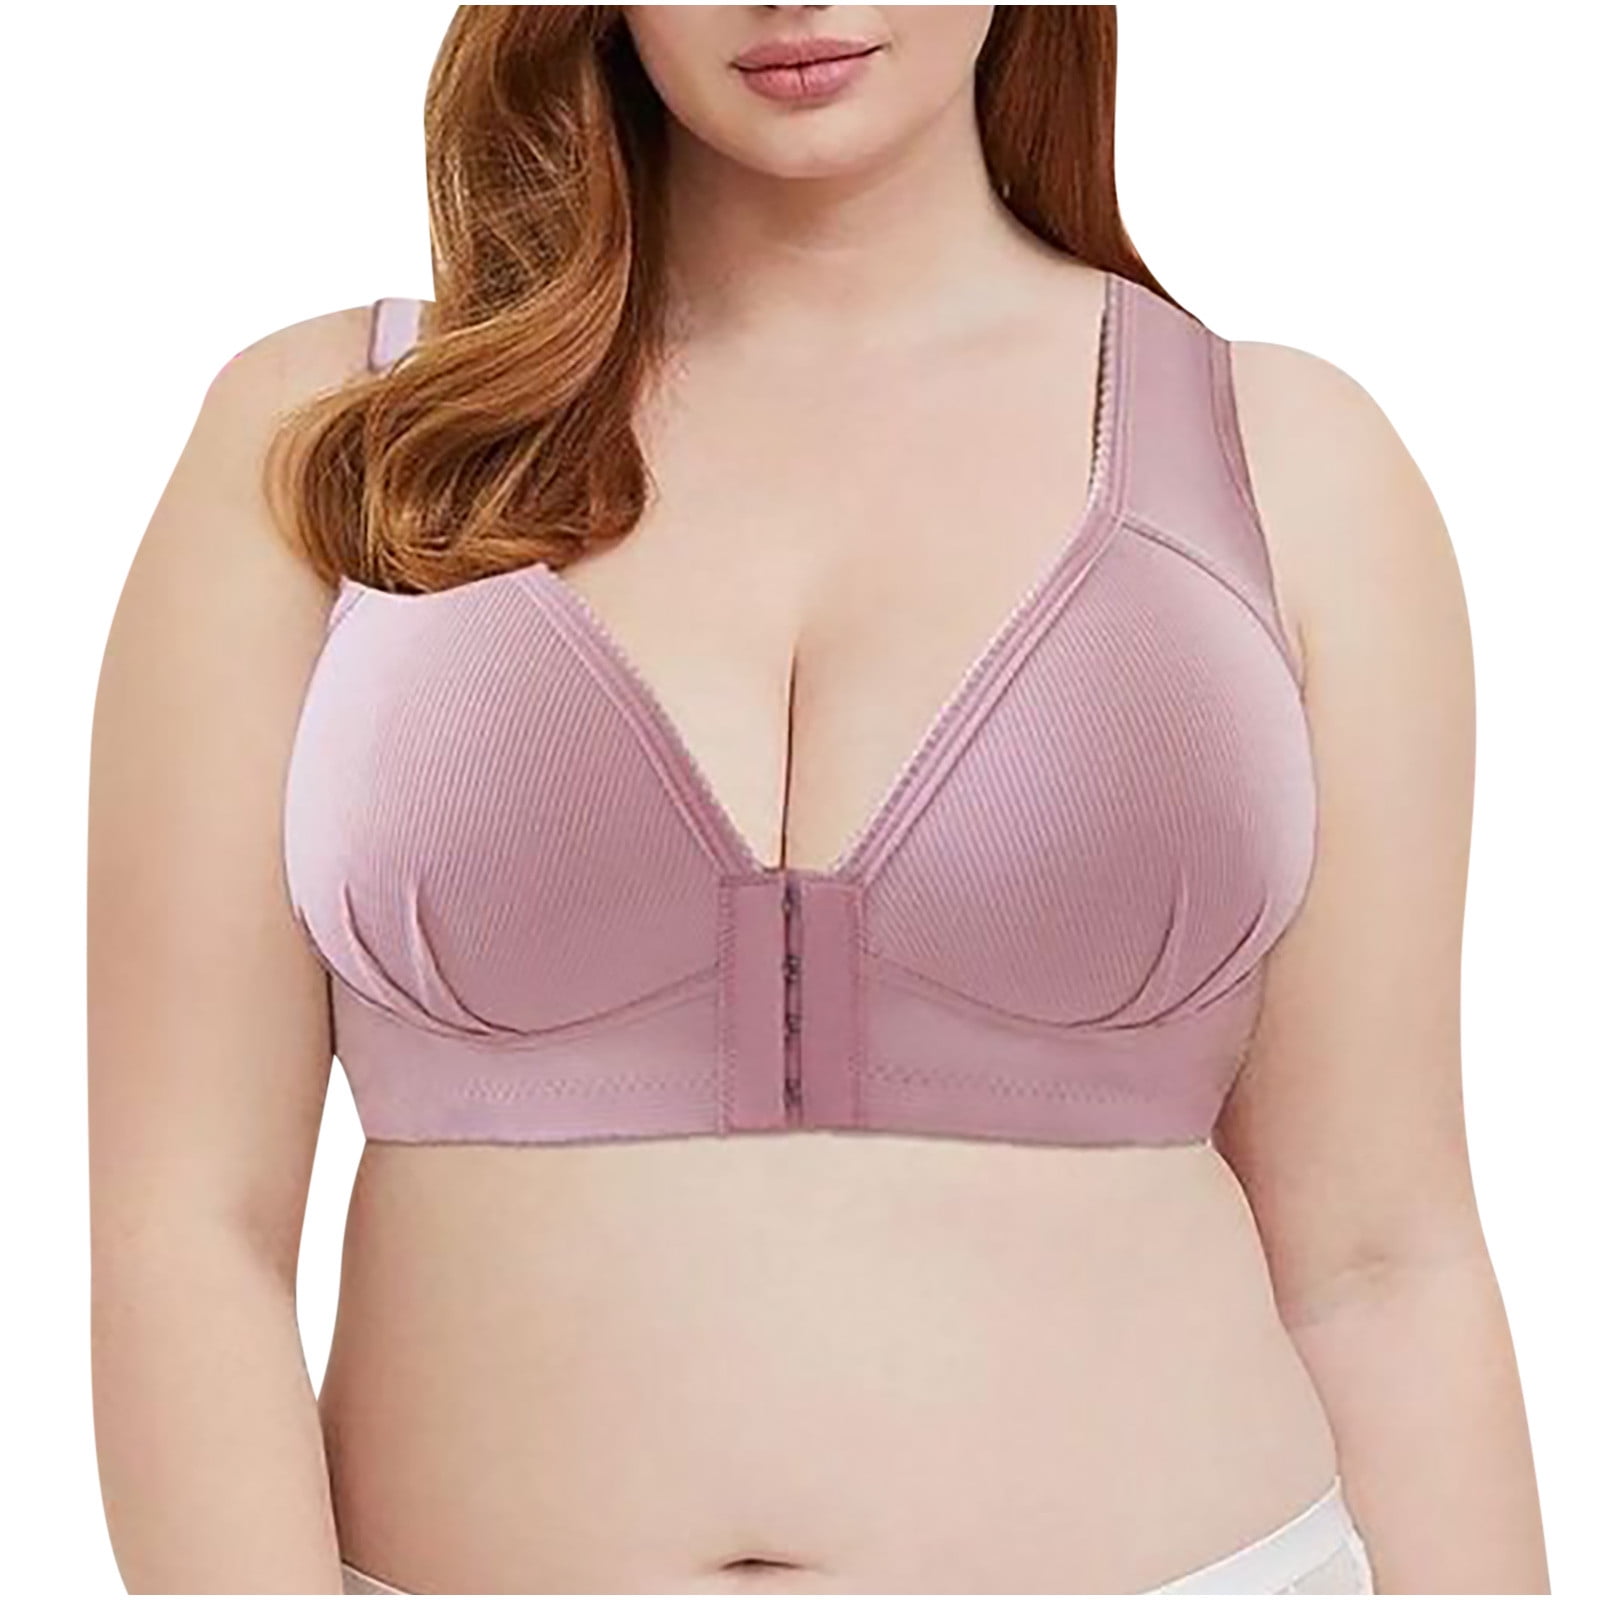 Bras for Women Full Coverage No Underwire Bra High Support Large